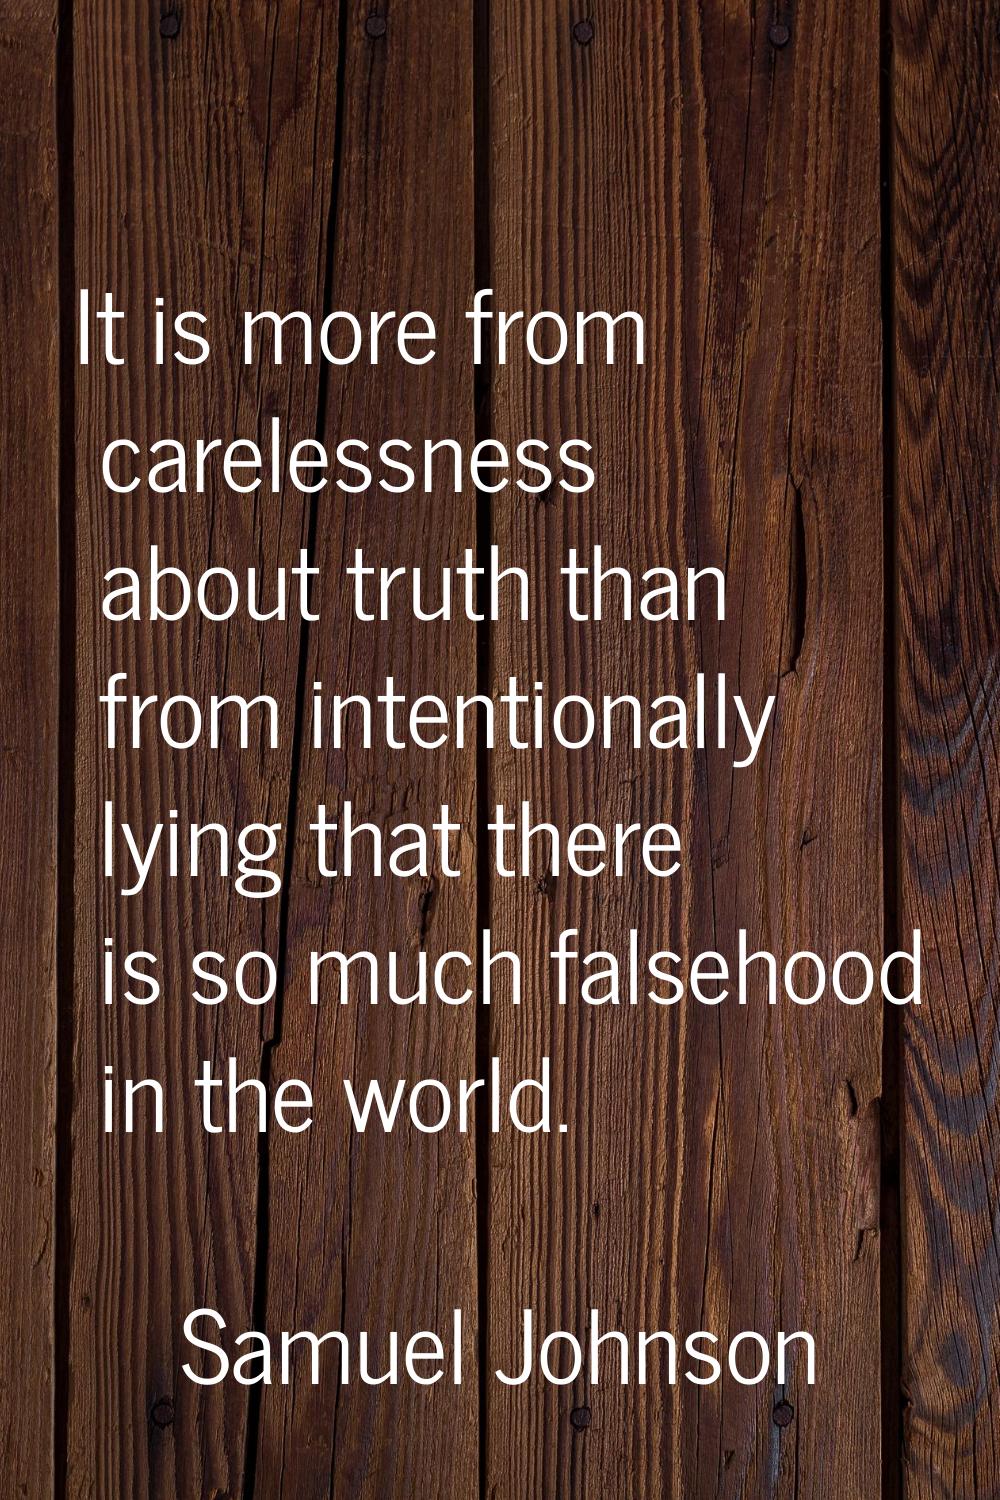 It is more from carelessness about truth than from intentionally lying that there is so much falseh